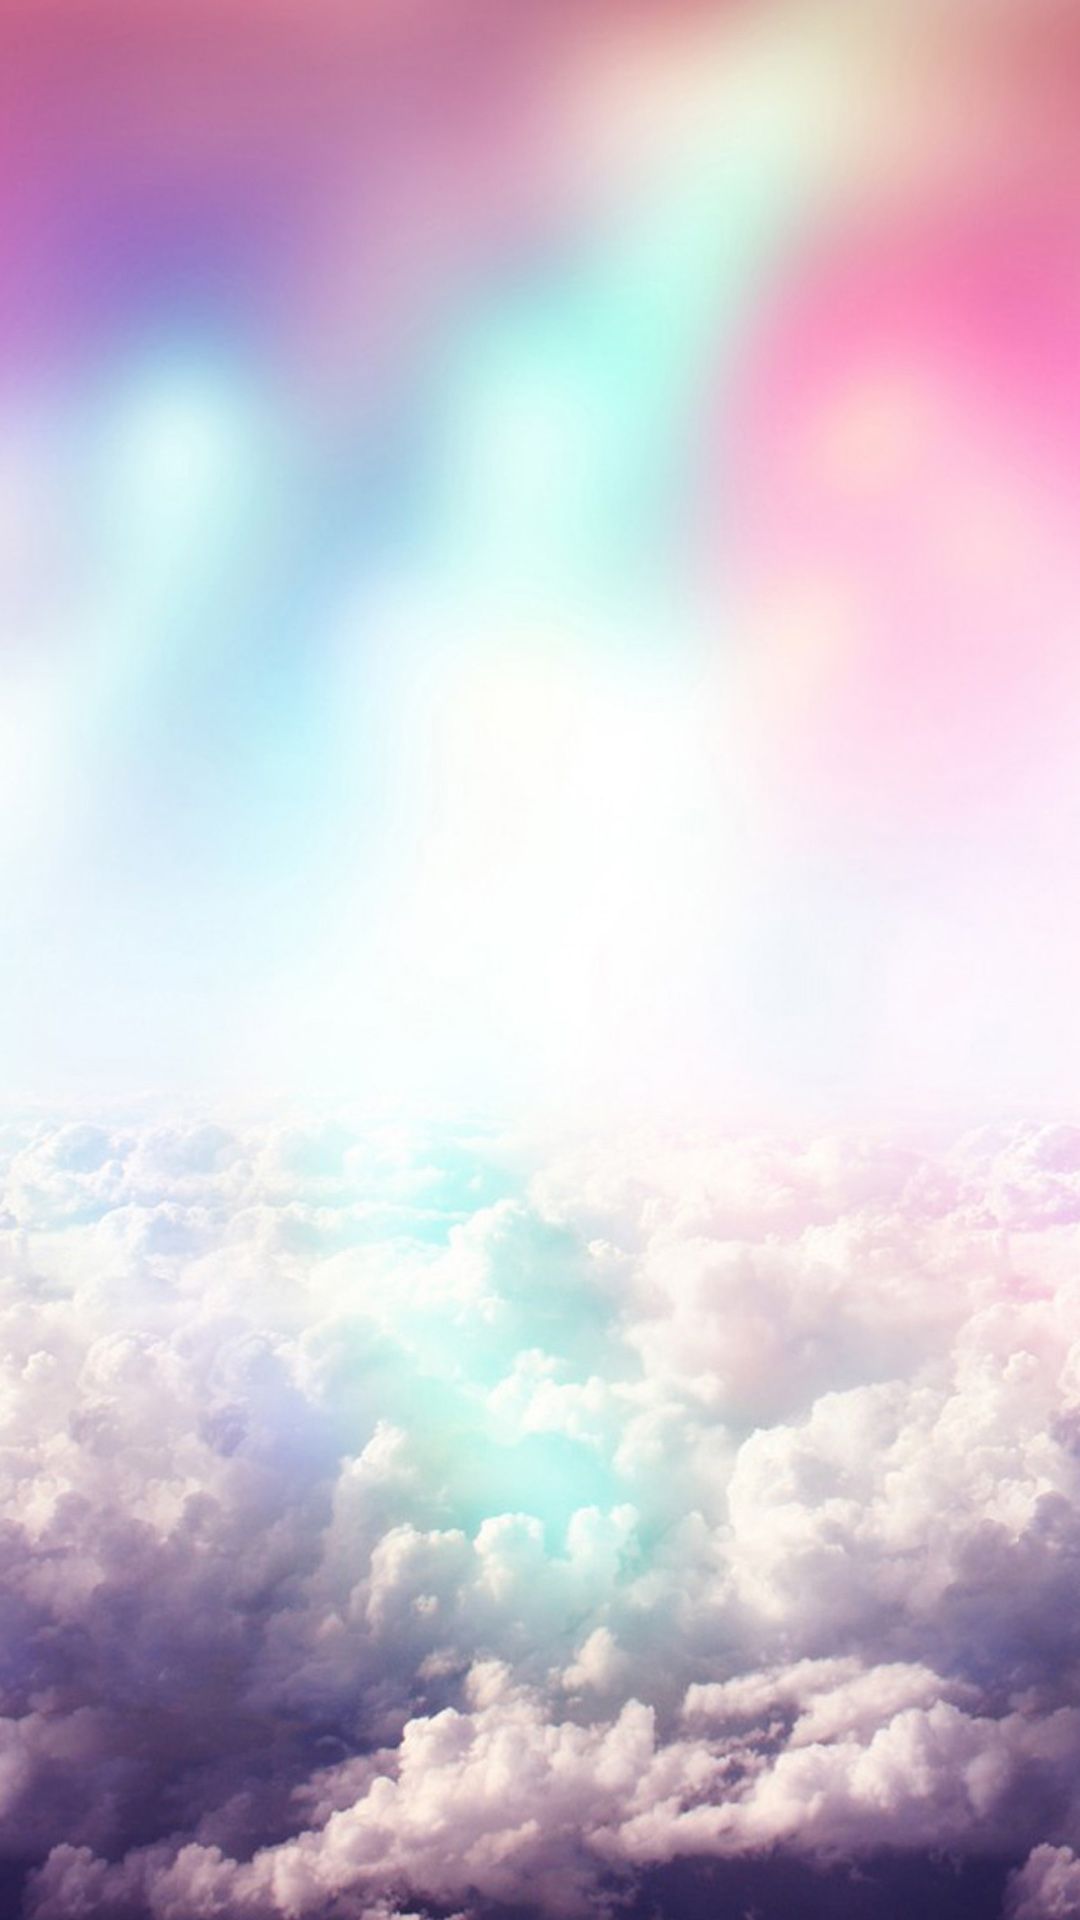 Rainbow Colors Over Fluffy Clouds Fantasy Android Wallpaper free